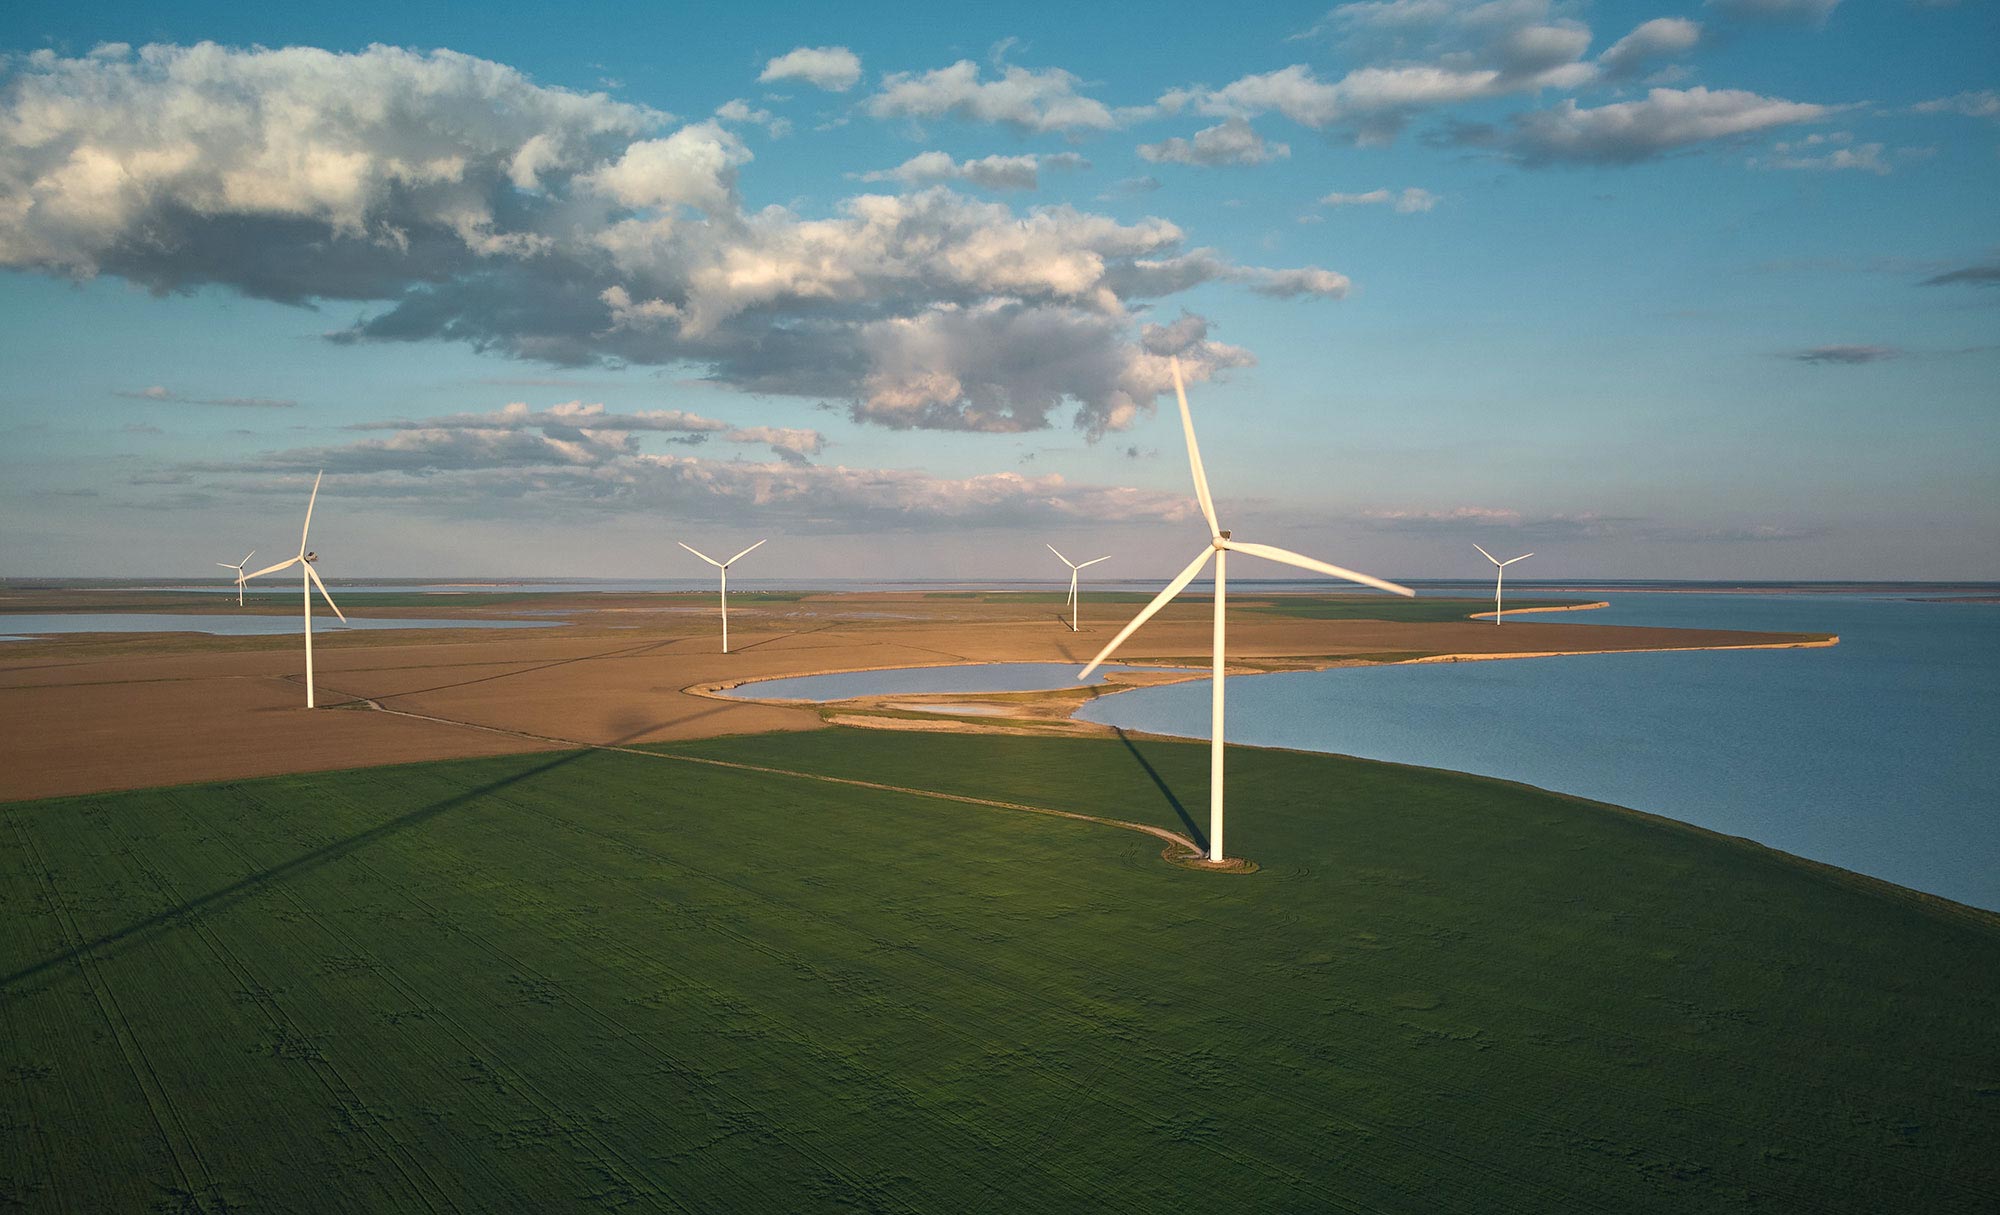 A field of wind turbines sits next to a large body of water.